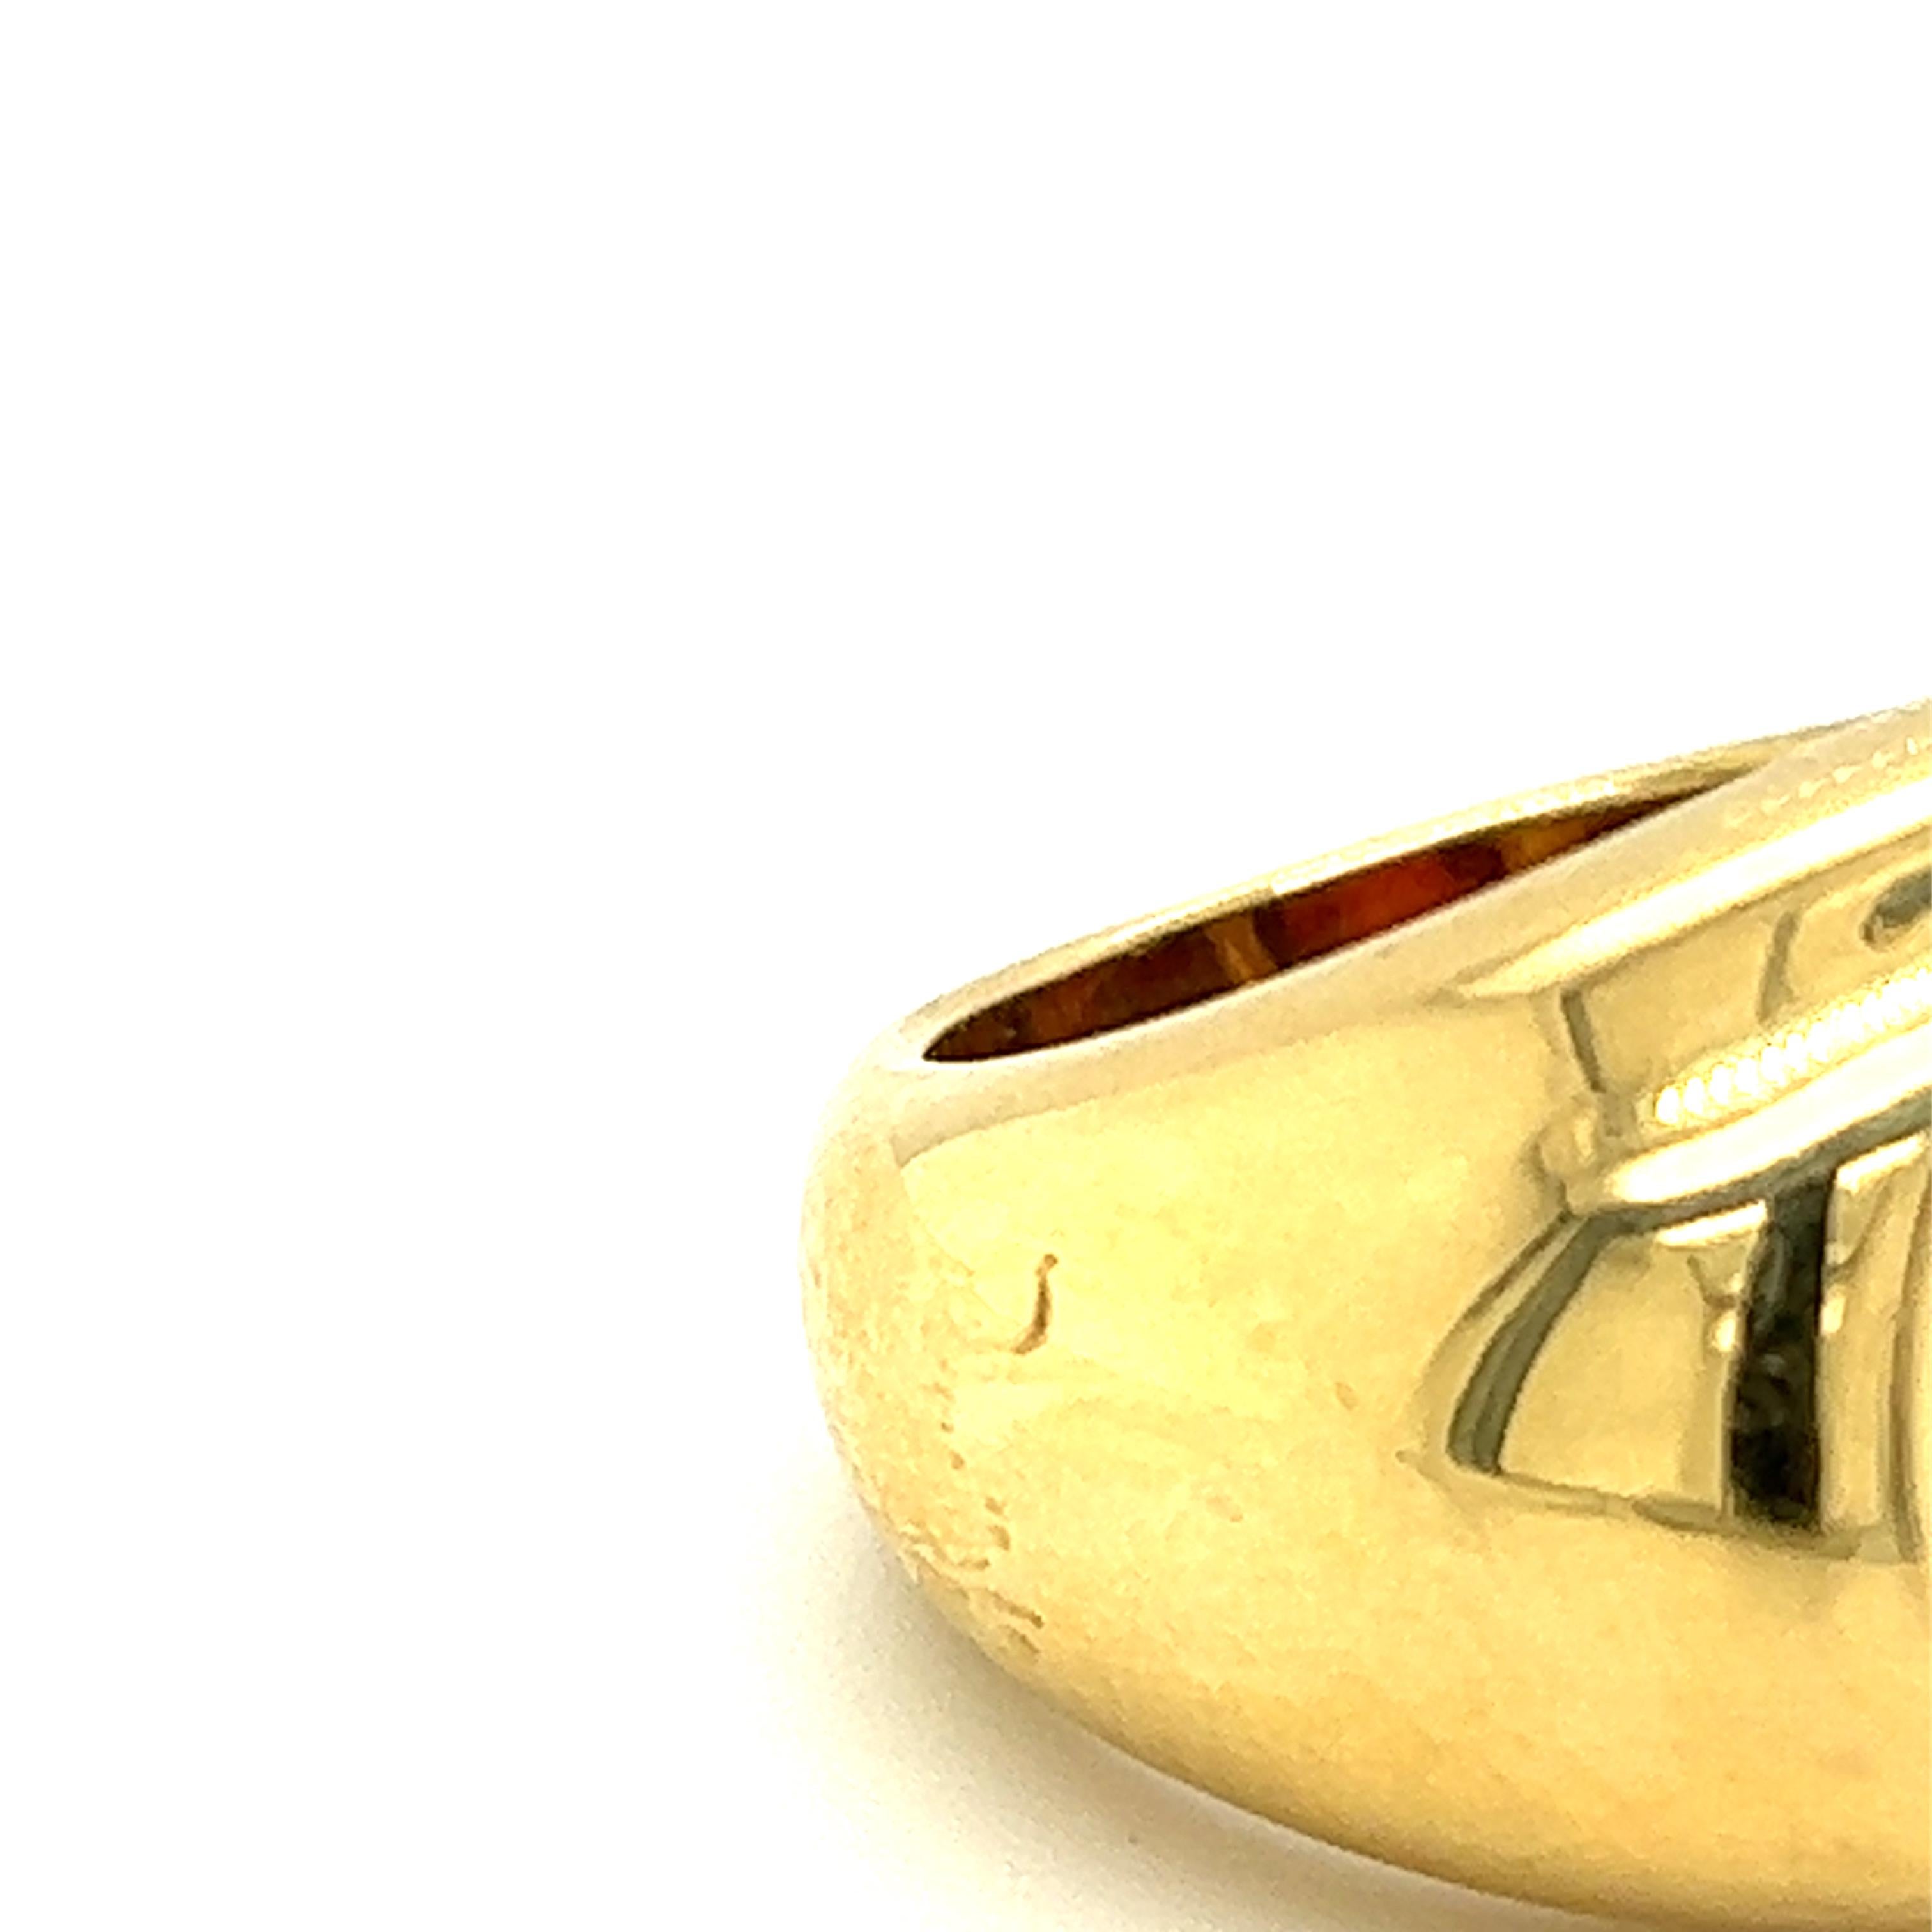 One Citrine Carved Disc Ring in 18 karat yellow gold by Pomellato features one 11.5x2.55mm oval-shaped polished citrine in a bezel setting. There is a small blemish in on the side of the ring (see photo), but metal is intact. 
The ring is a finger